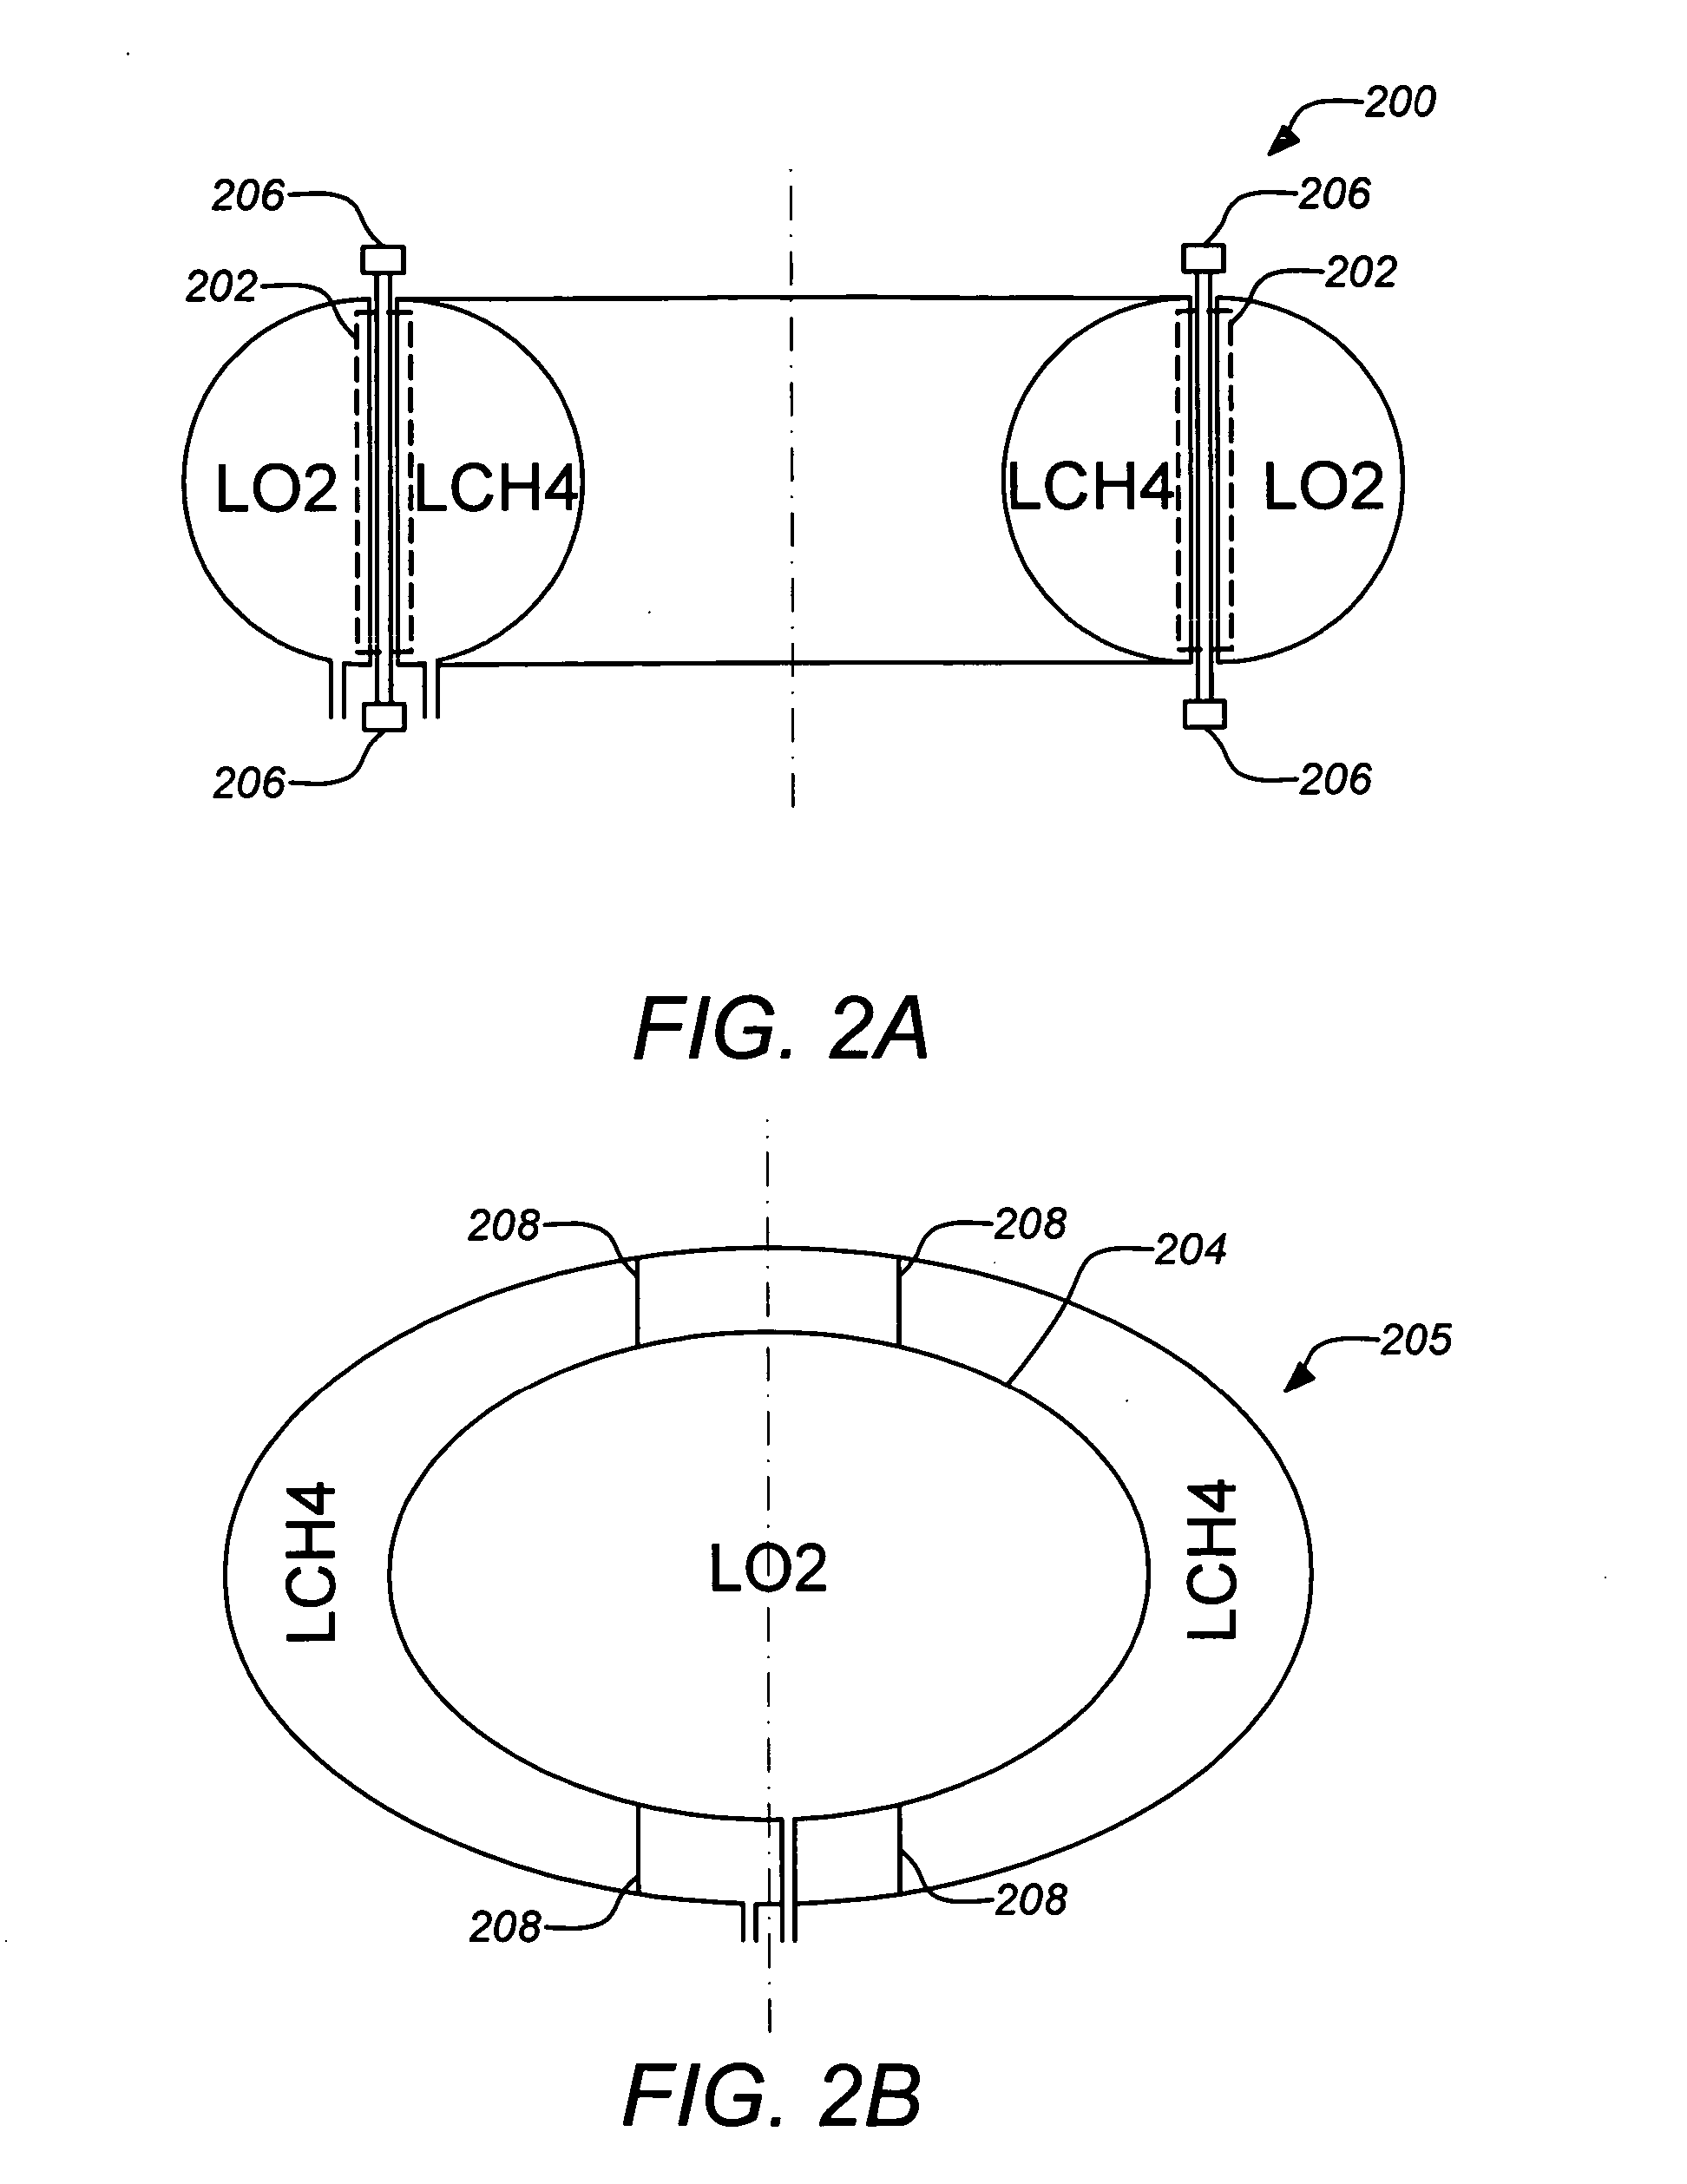 Thermally coupled liquid oxygen and liquid methane storage vessel